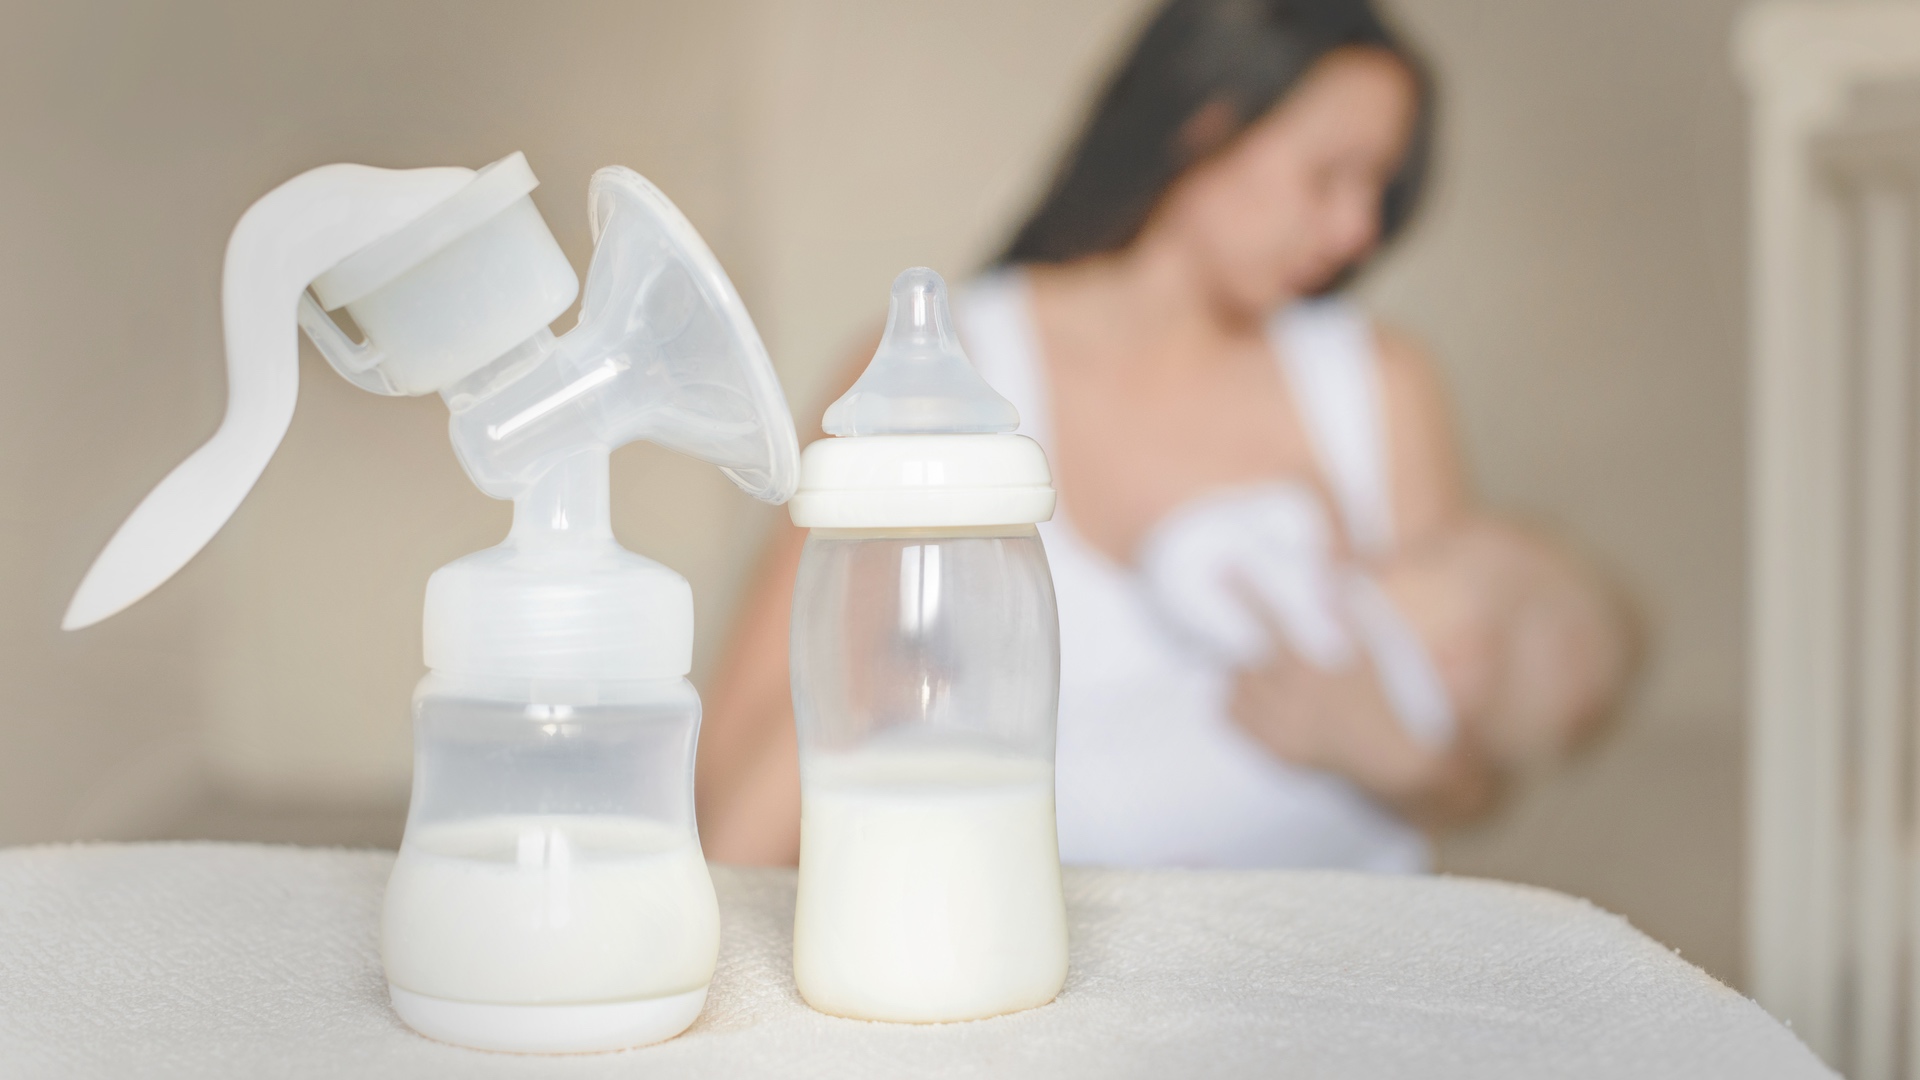 Breast Shells to Collect Breast Milk While On the Go